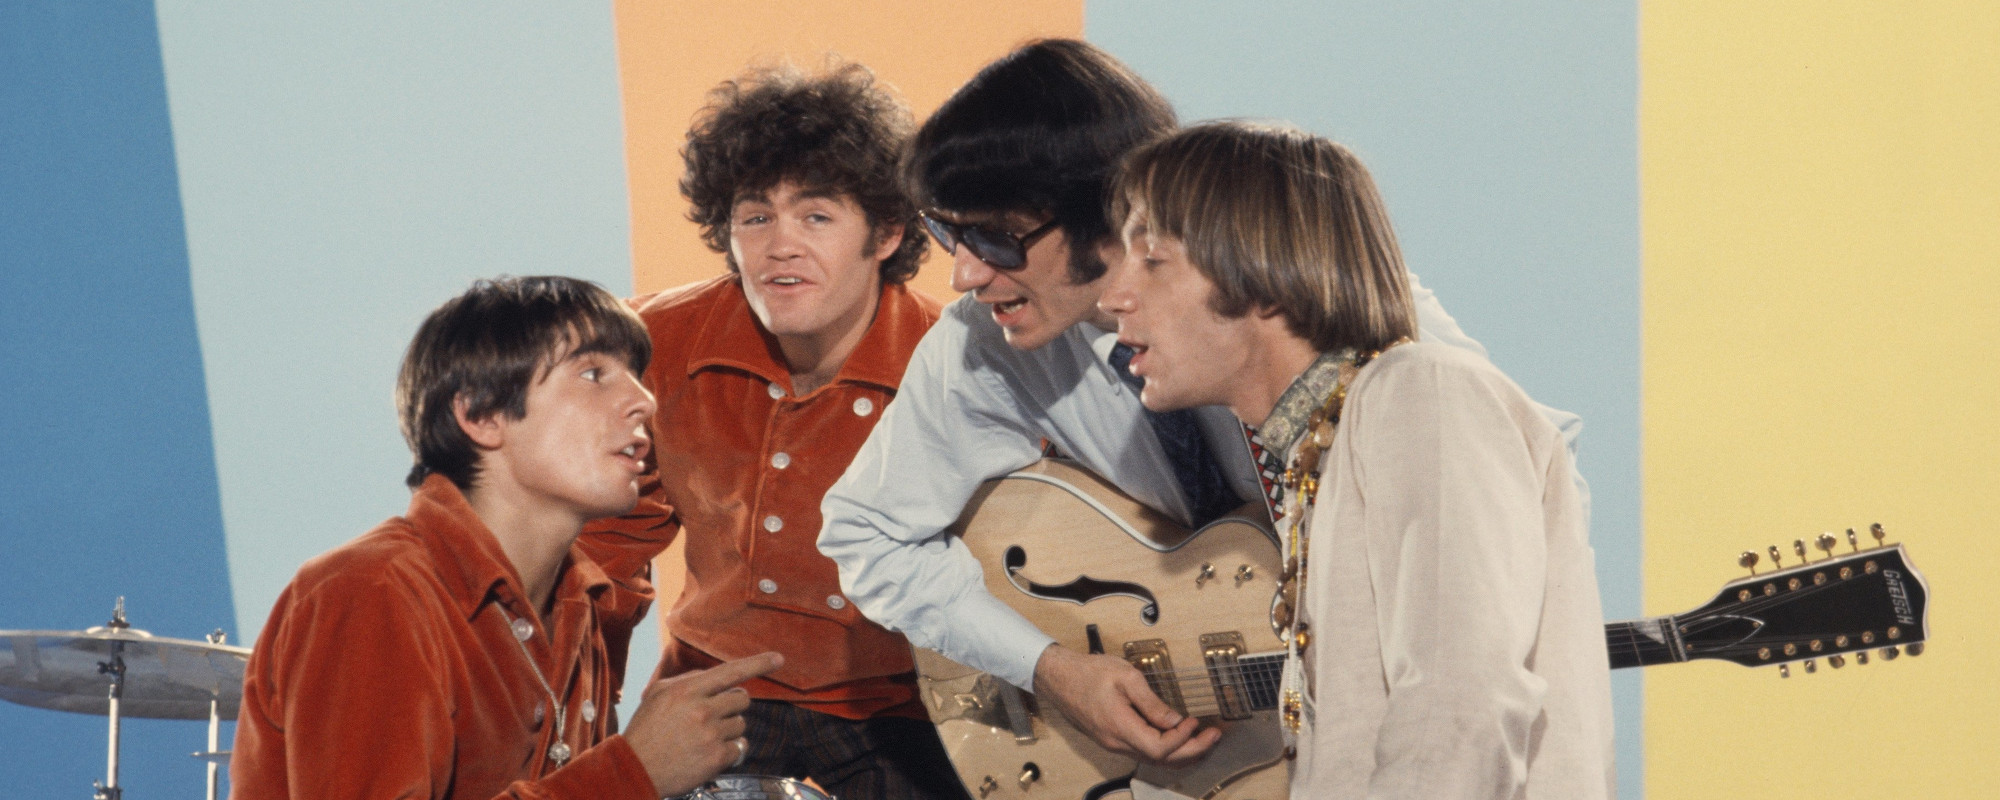 The Lie that Led to a Hit Song: The Story Behind “Valleri” by The Monkees